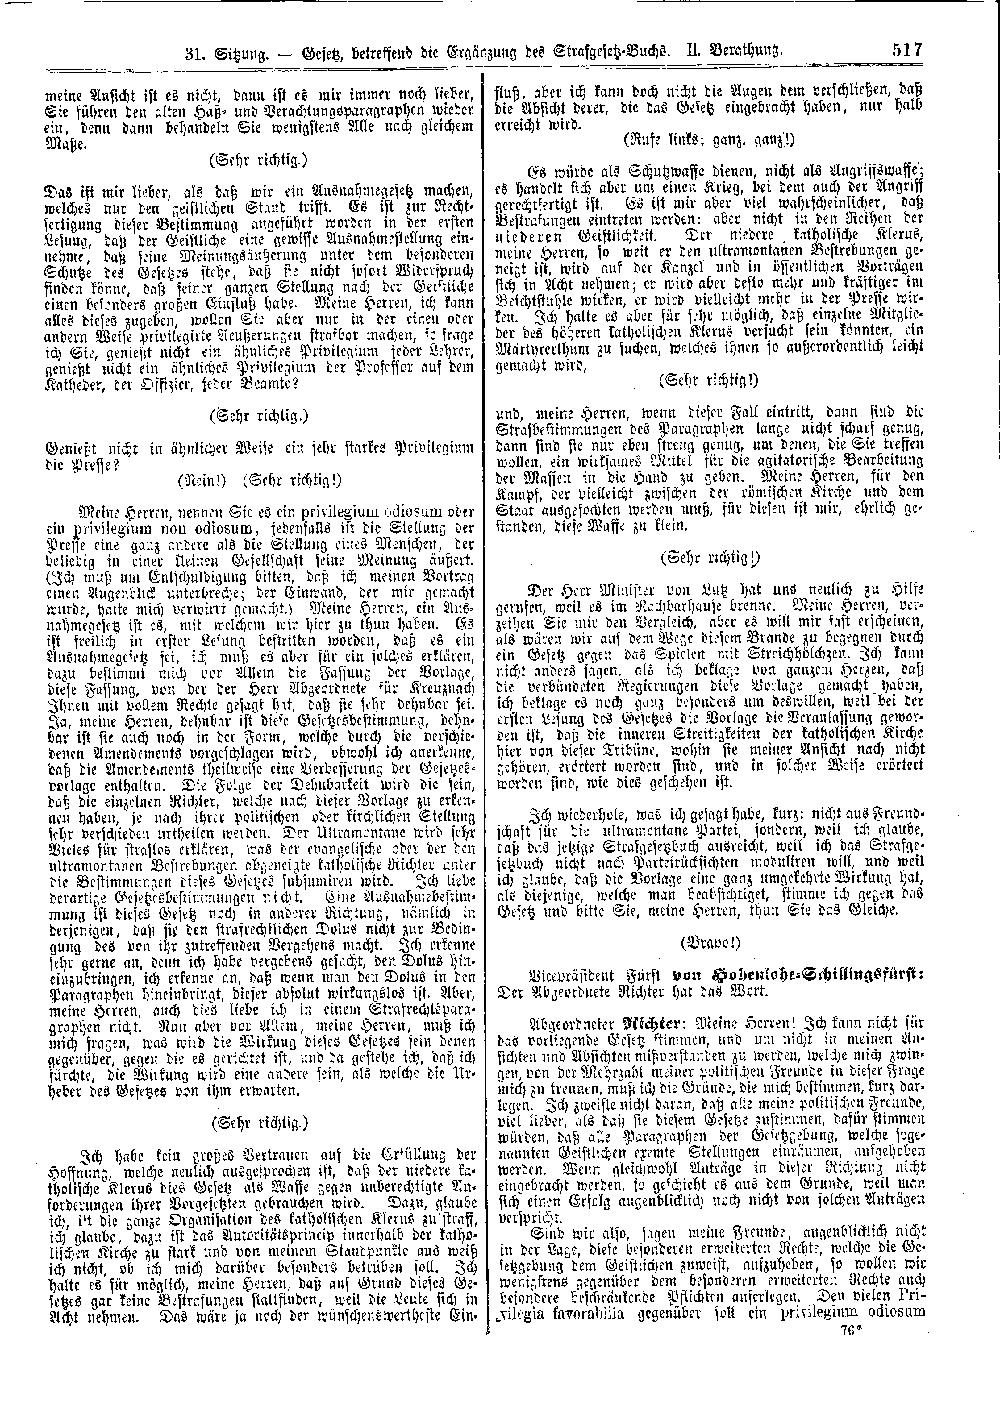 Scan of page 517